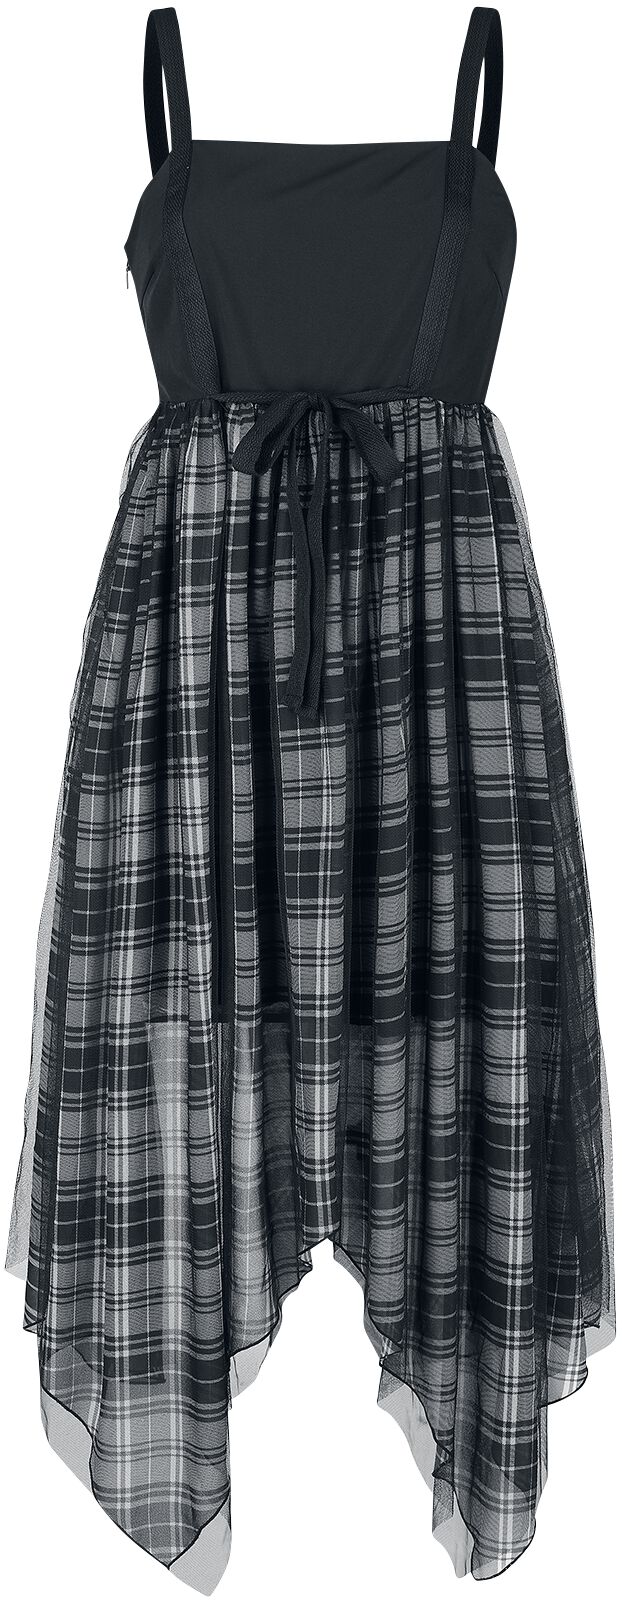 Image of Abito lungo di Rock Rebel by EMP - Dress with plaid tapered skirt - S a L - Donna - nero/grigio